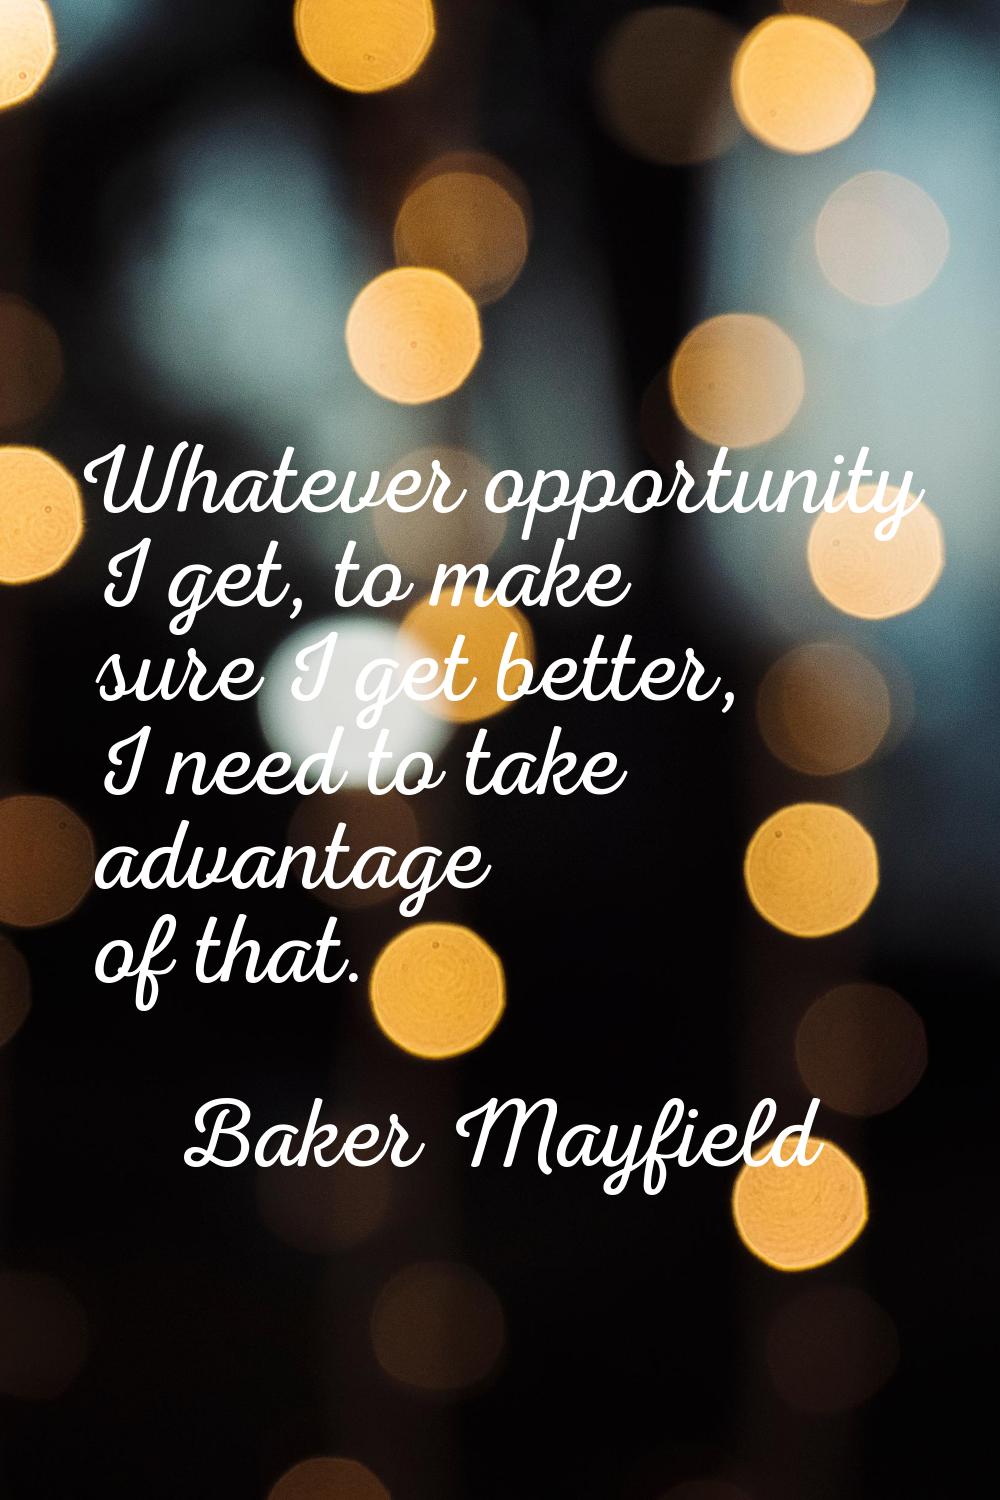 Whatever opportunity I get, to make sure I get better, I need to take advantage of that.